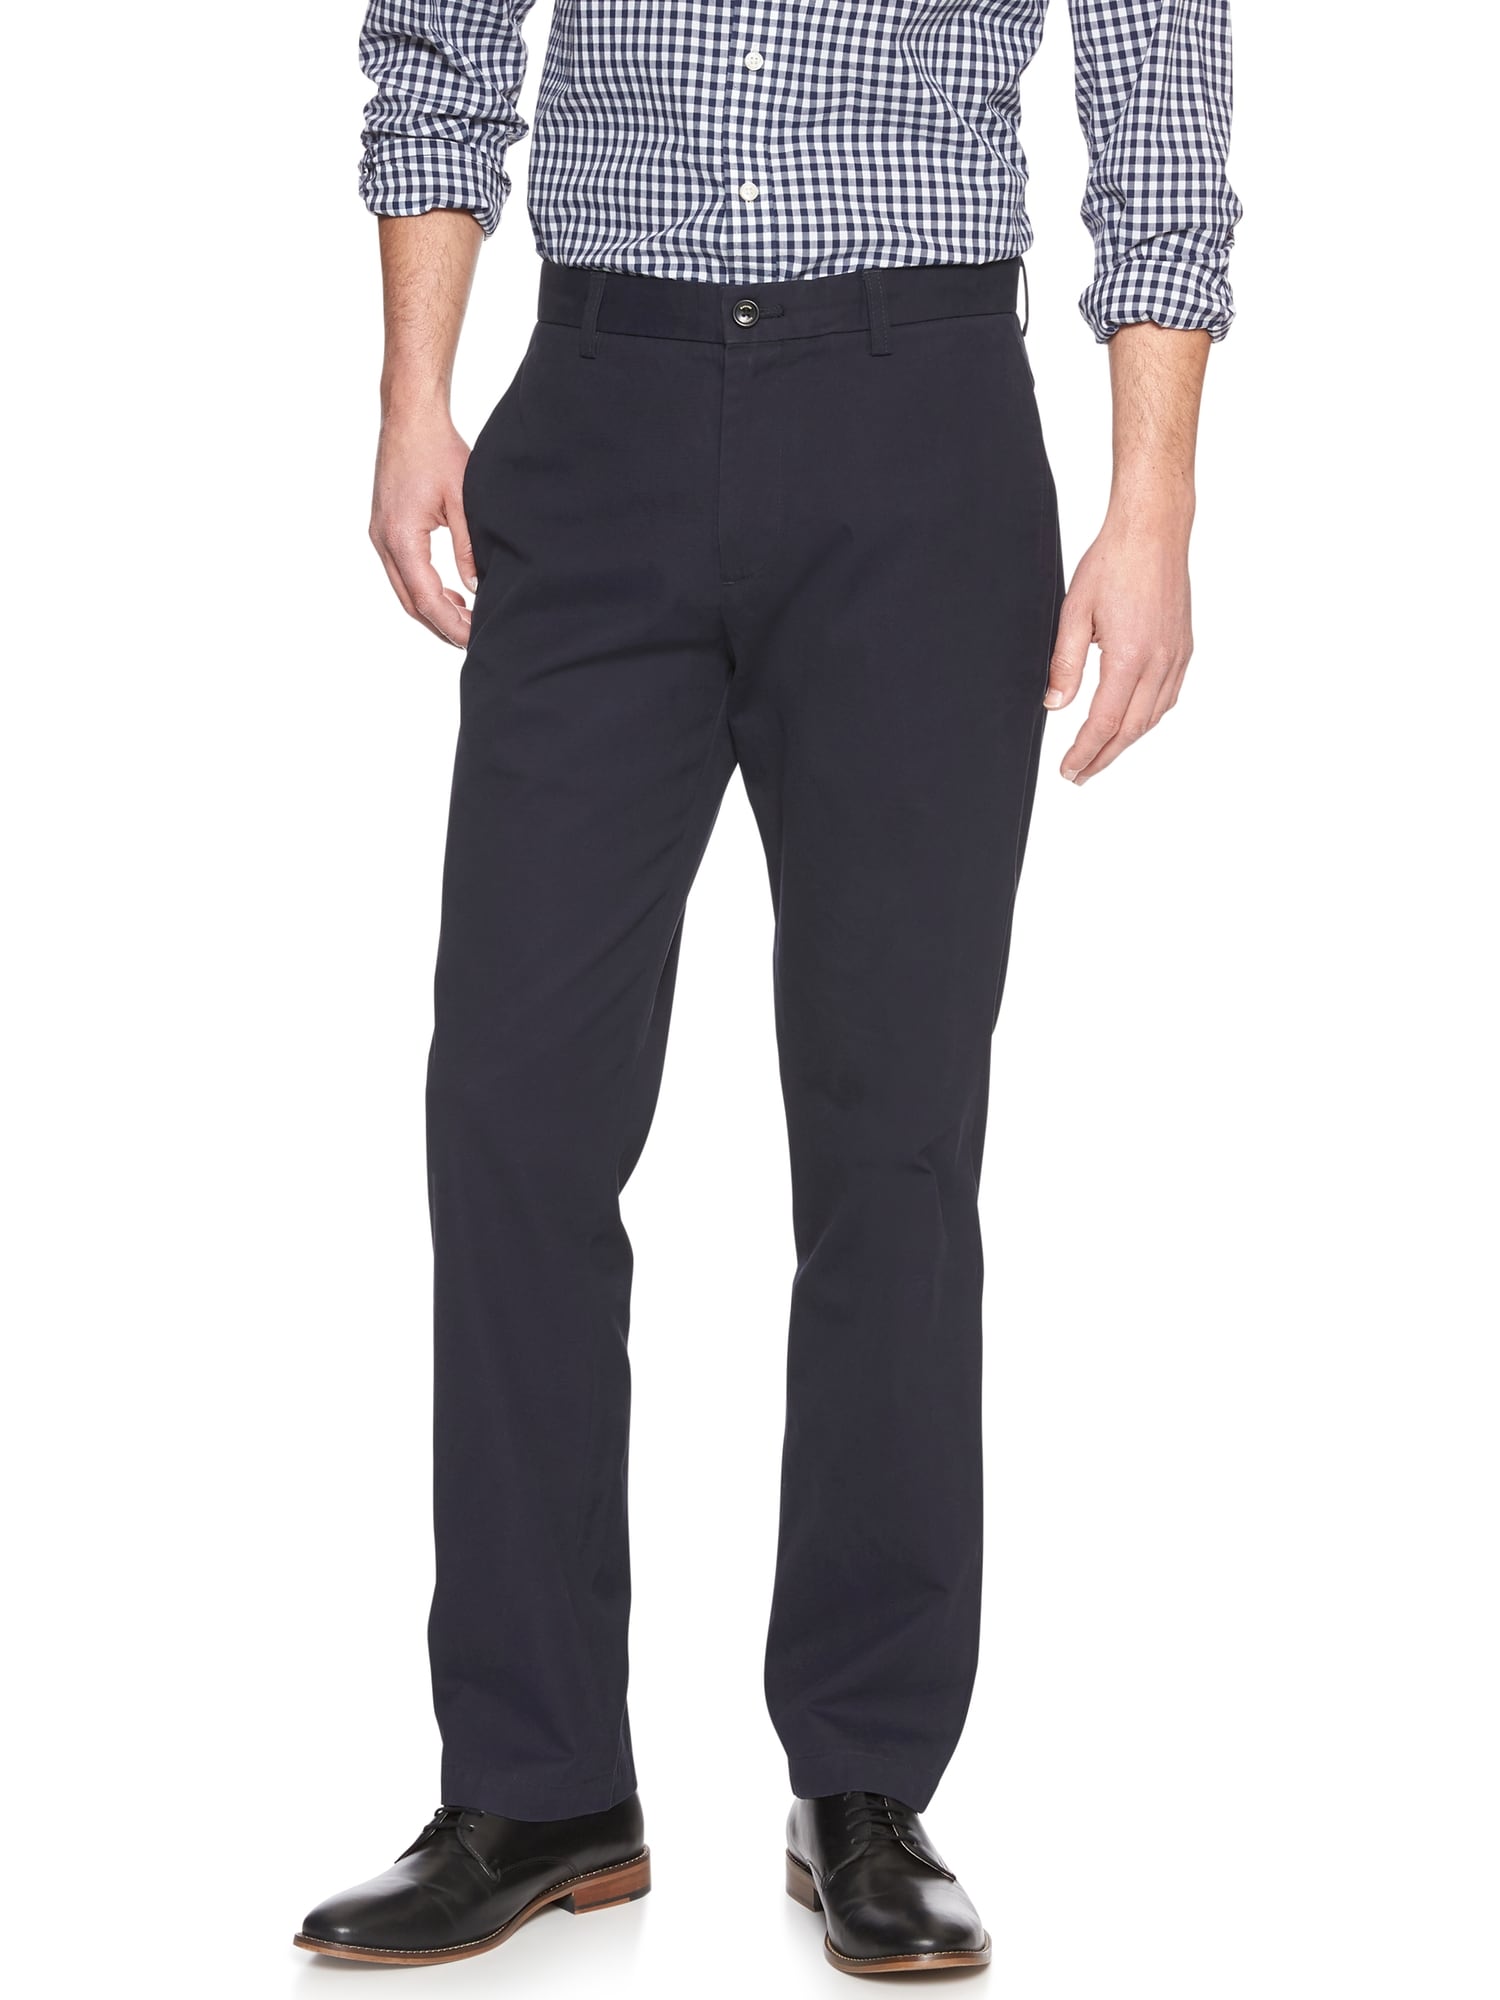 Gavin Relaxed-Fit Chino